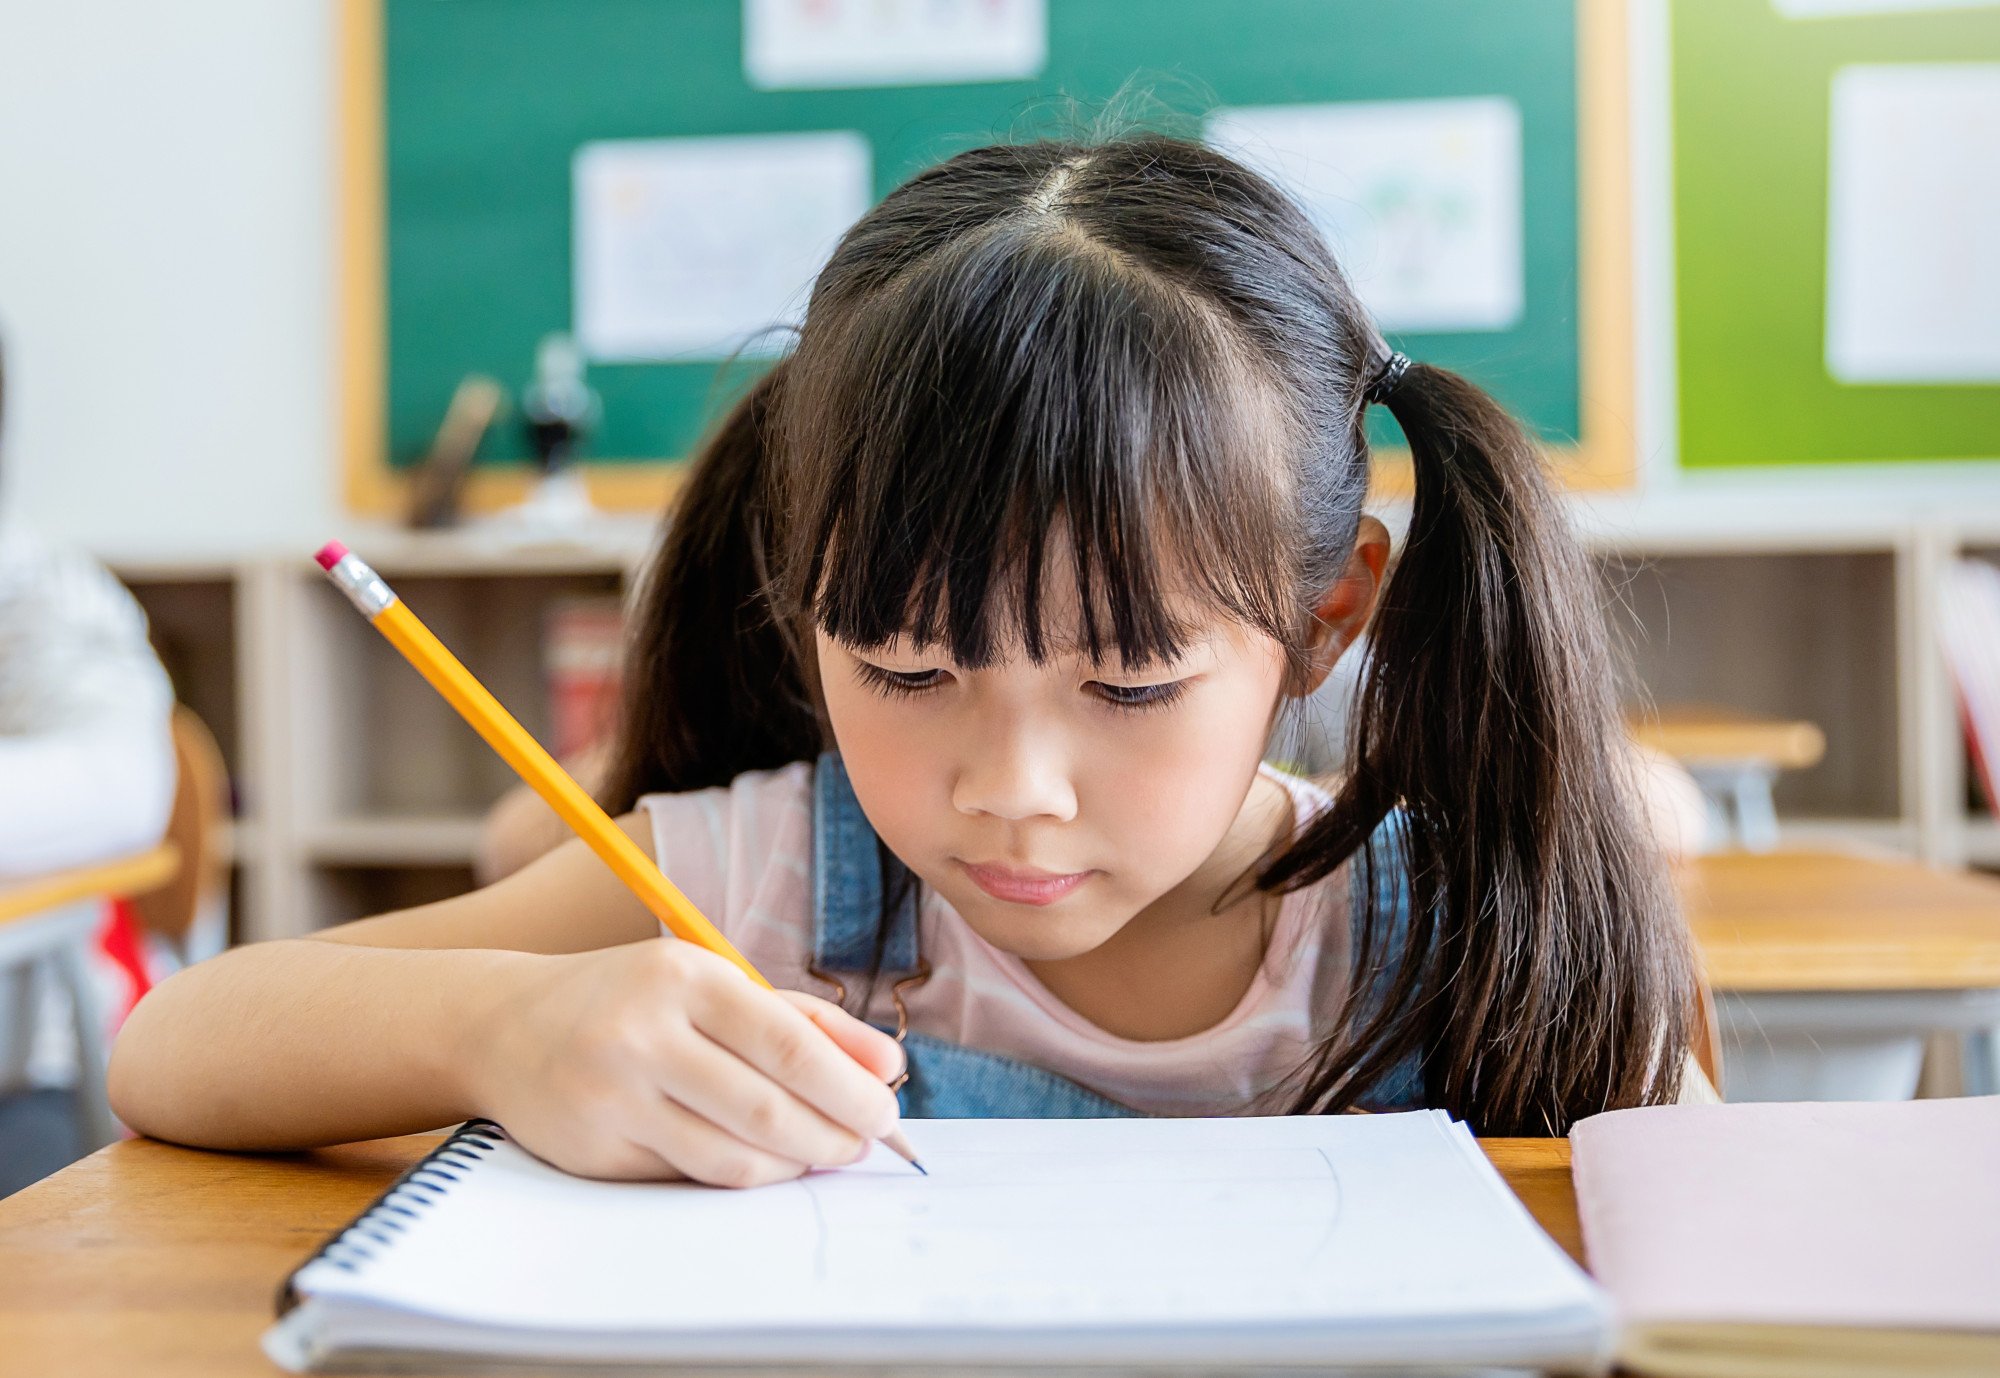 The teacher’s punishment of students who did not eat snacks in class has sparked outrage among some parents. Photo: Shutterstock